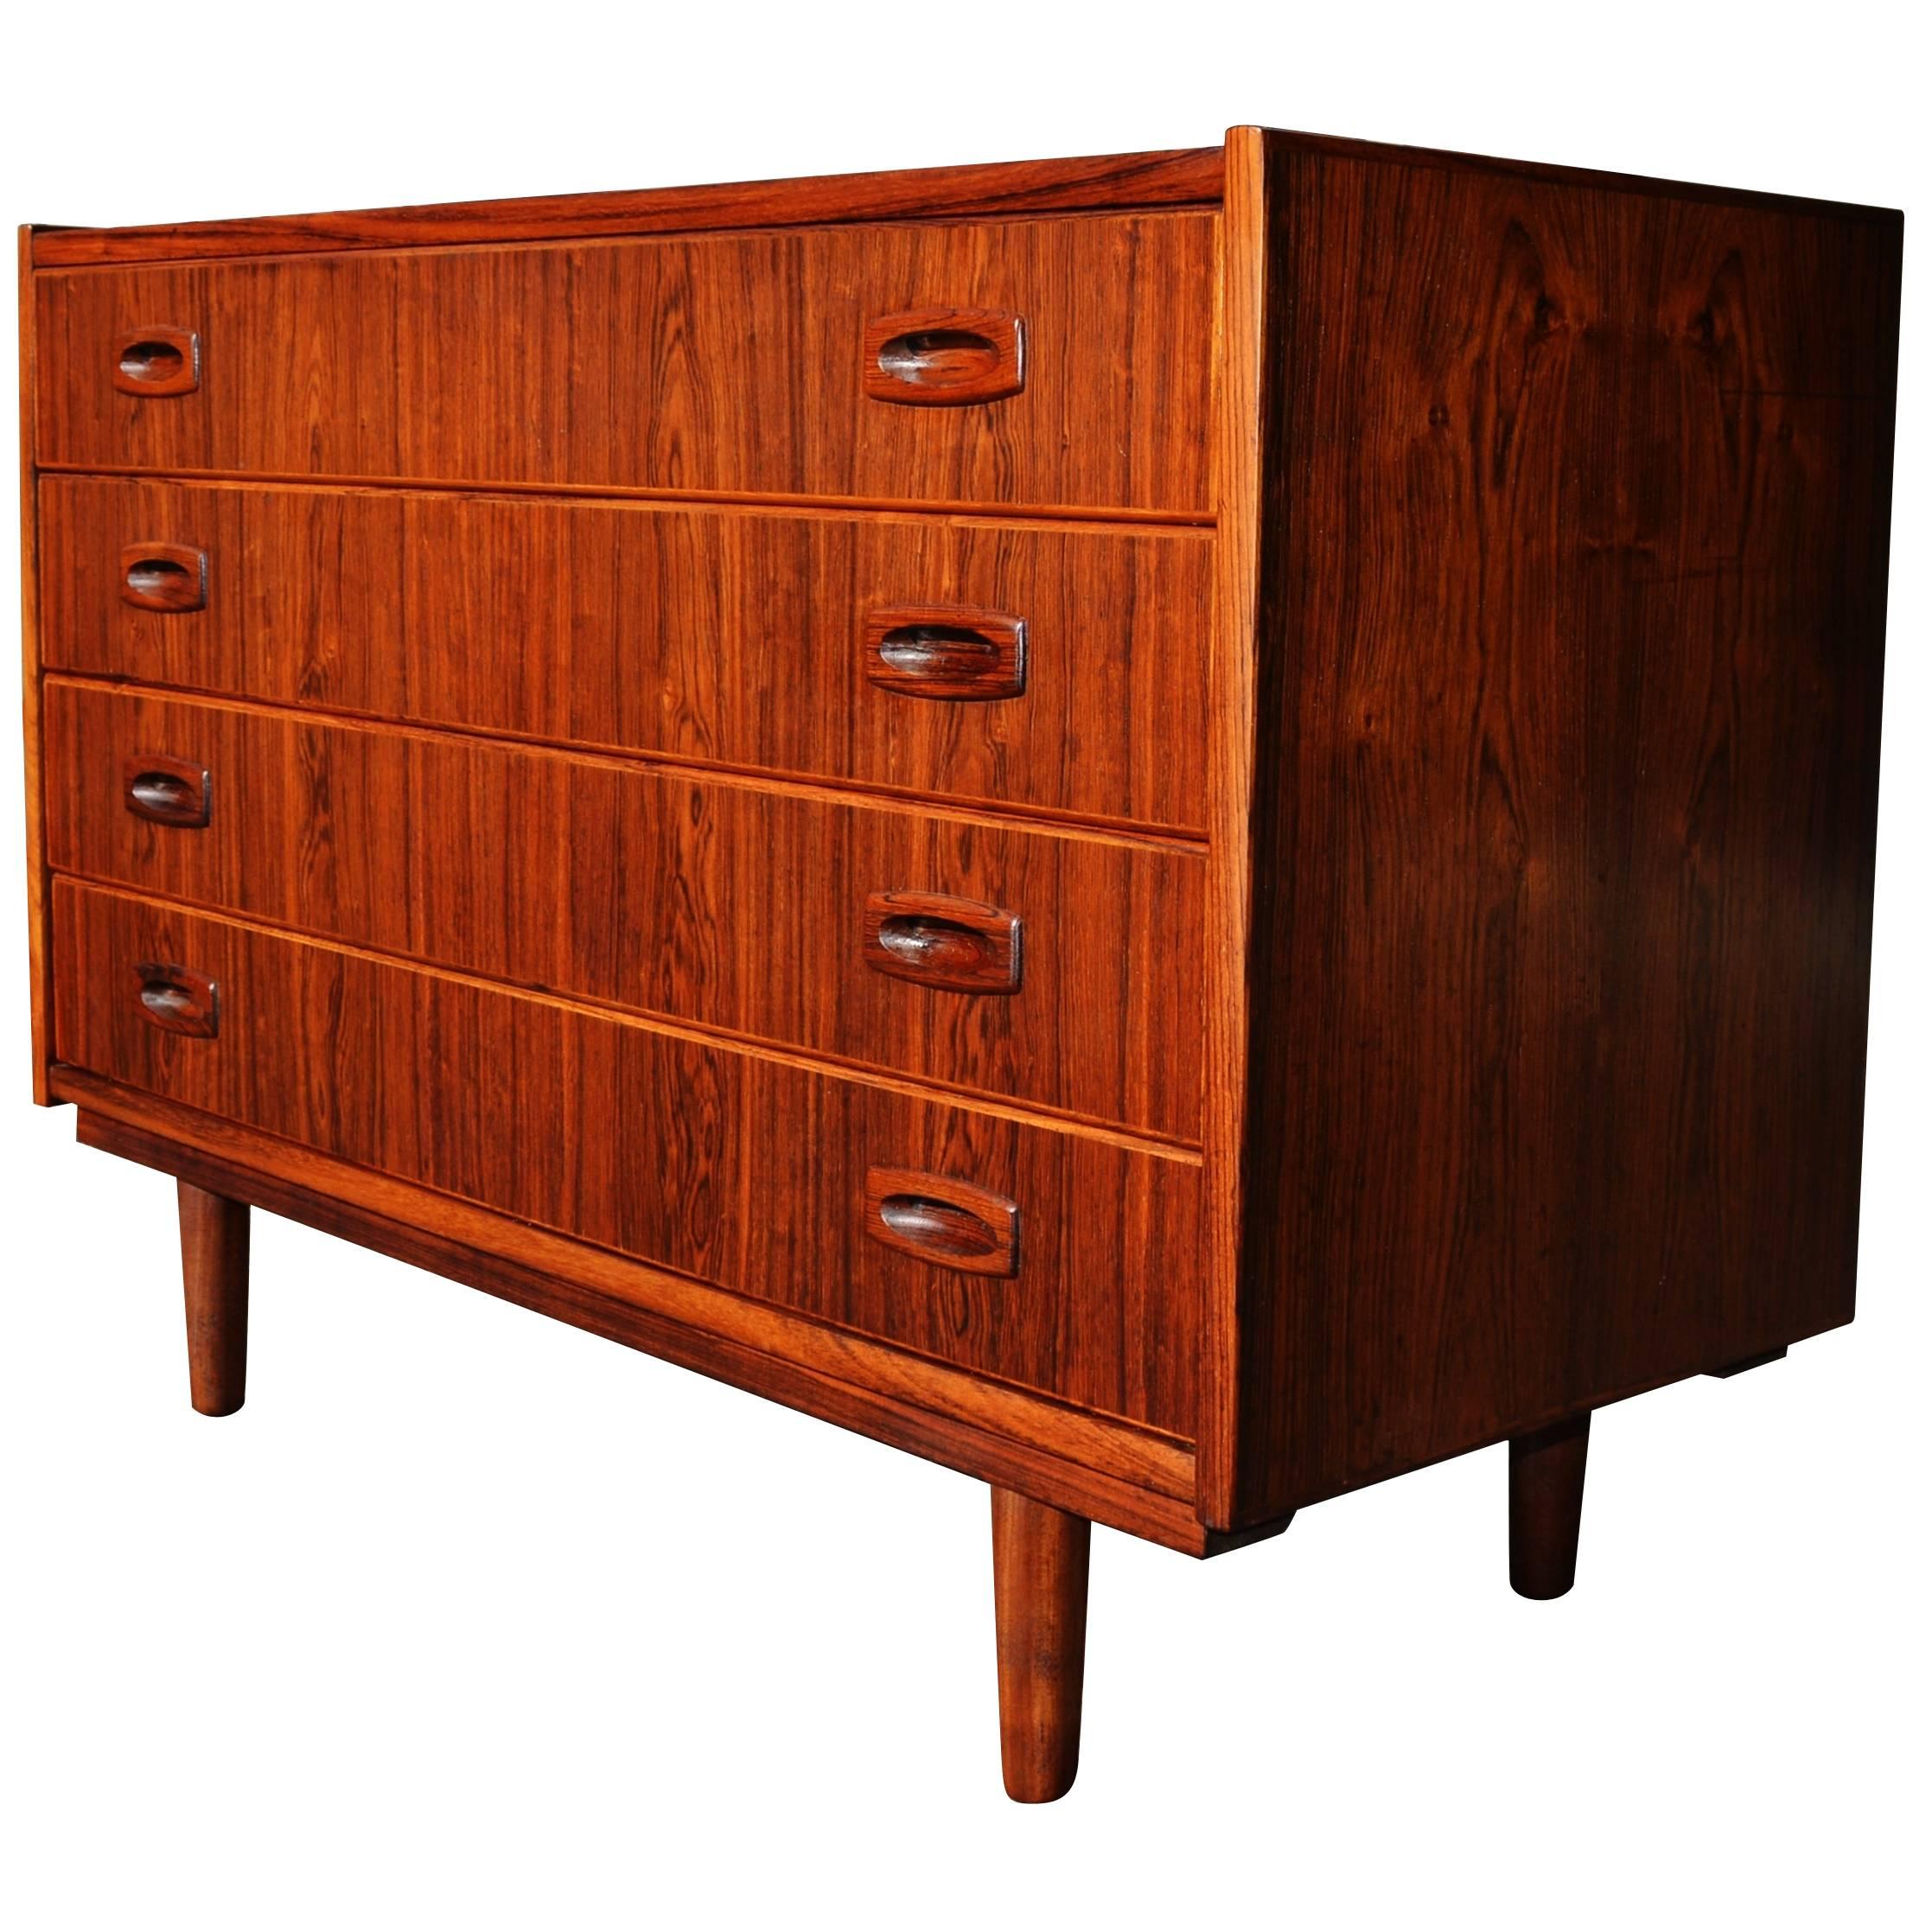 Lovely Rosewood Chest of Drawers or Dresser by Rasmussen